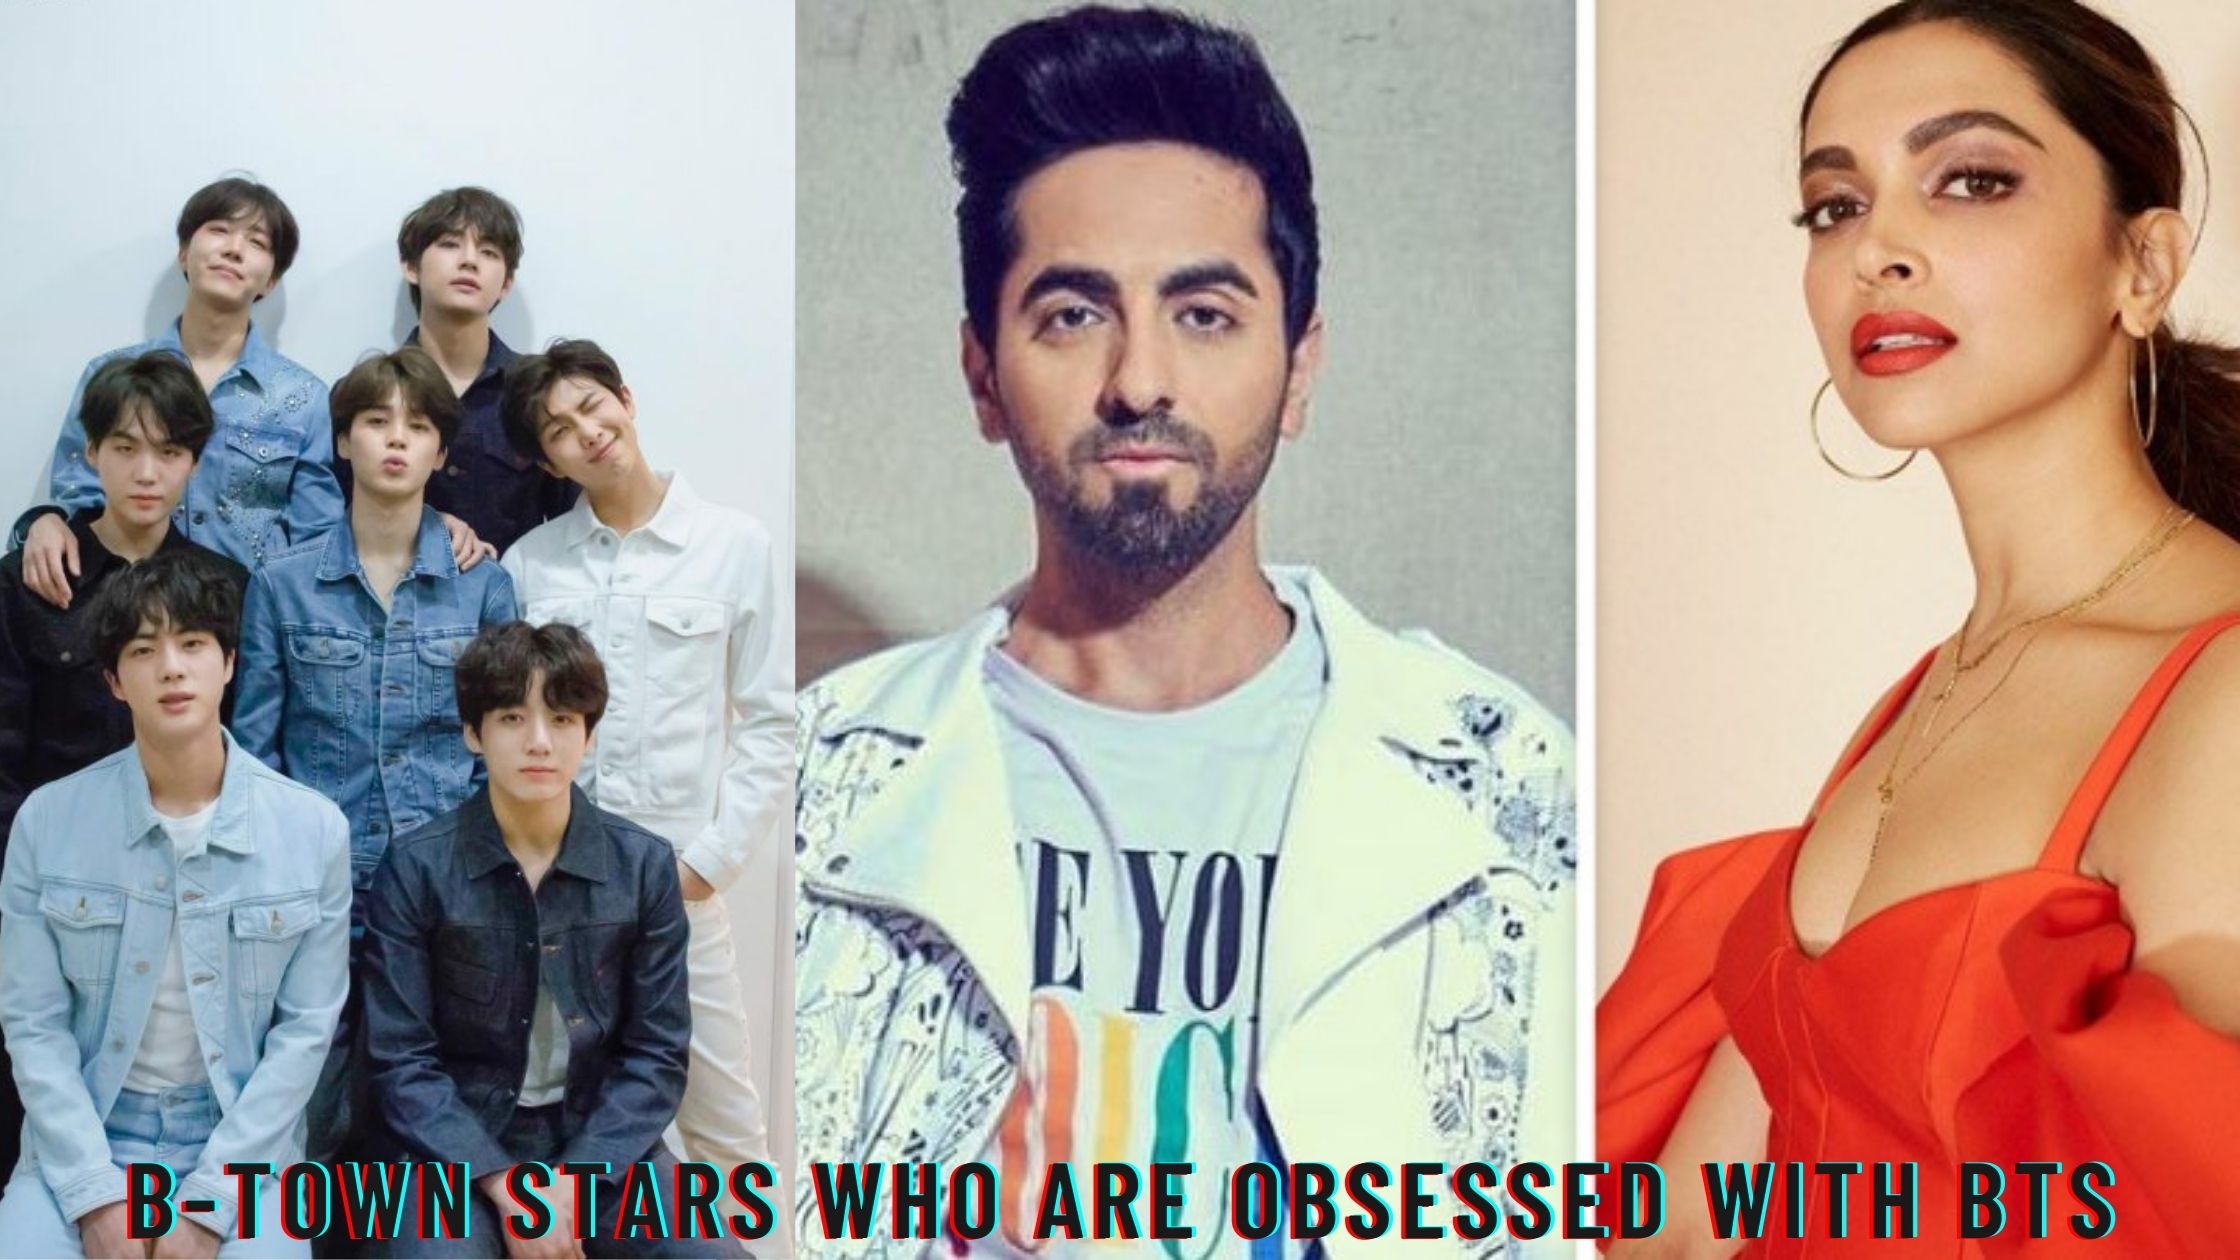 B-town stars who are obsessed with BTS